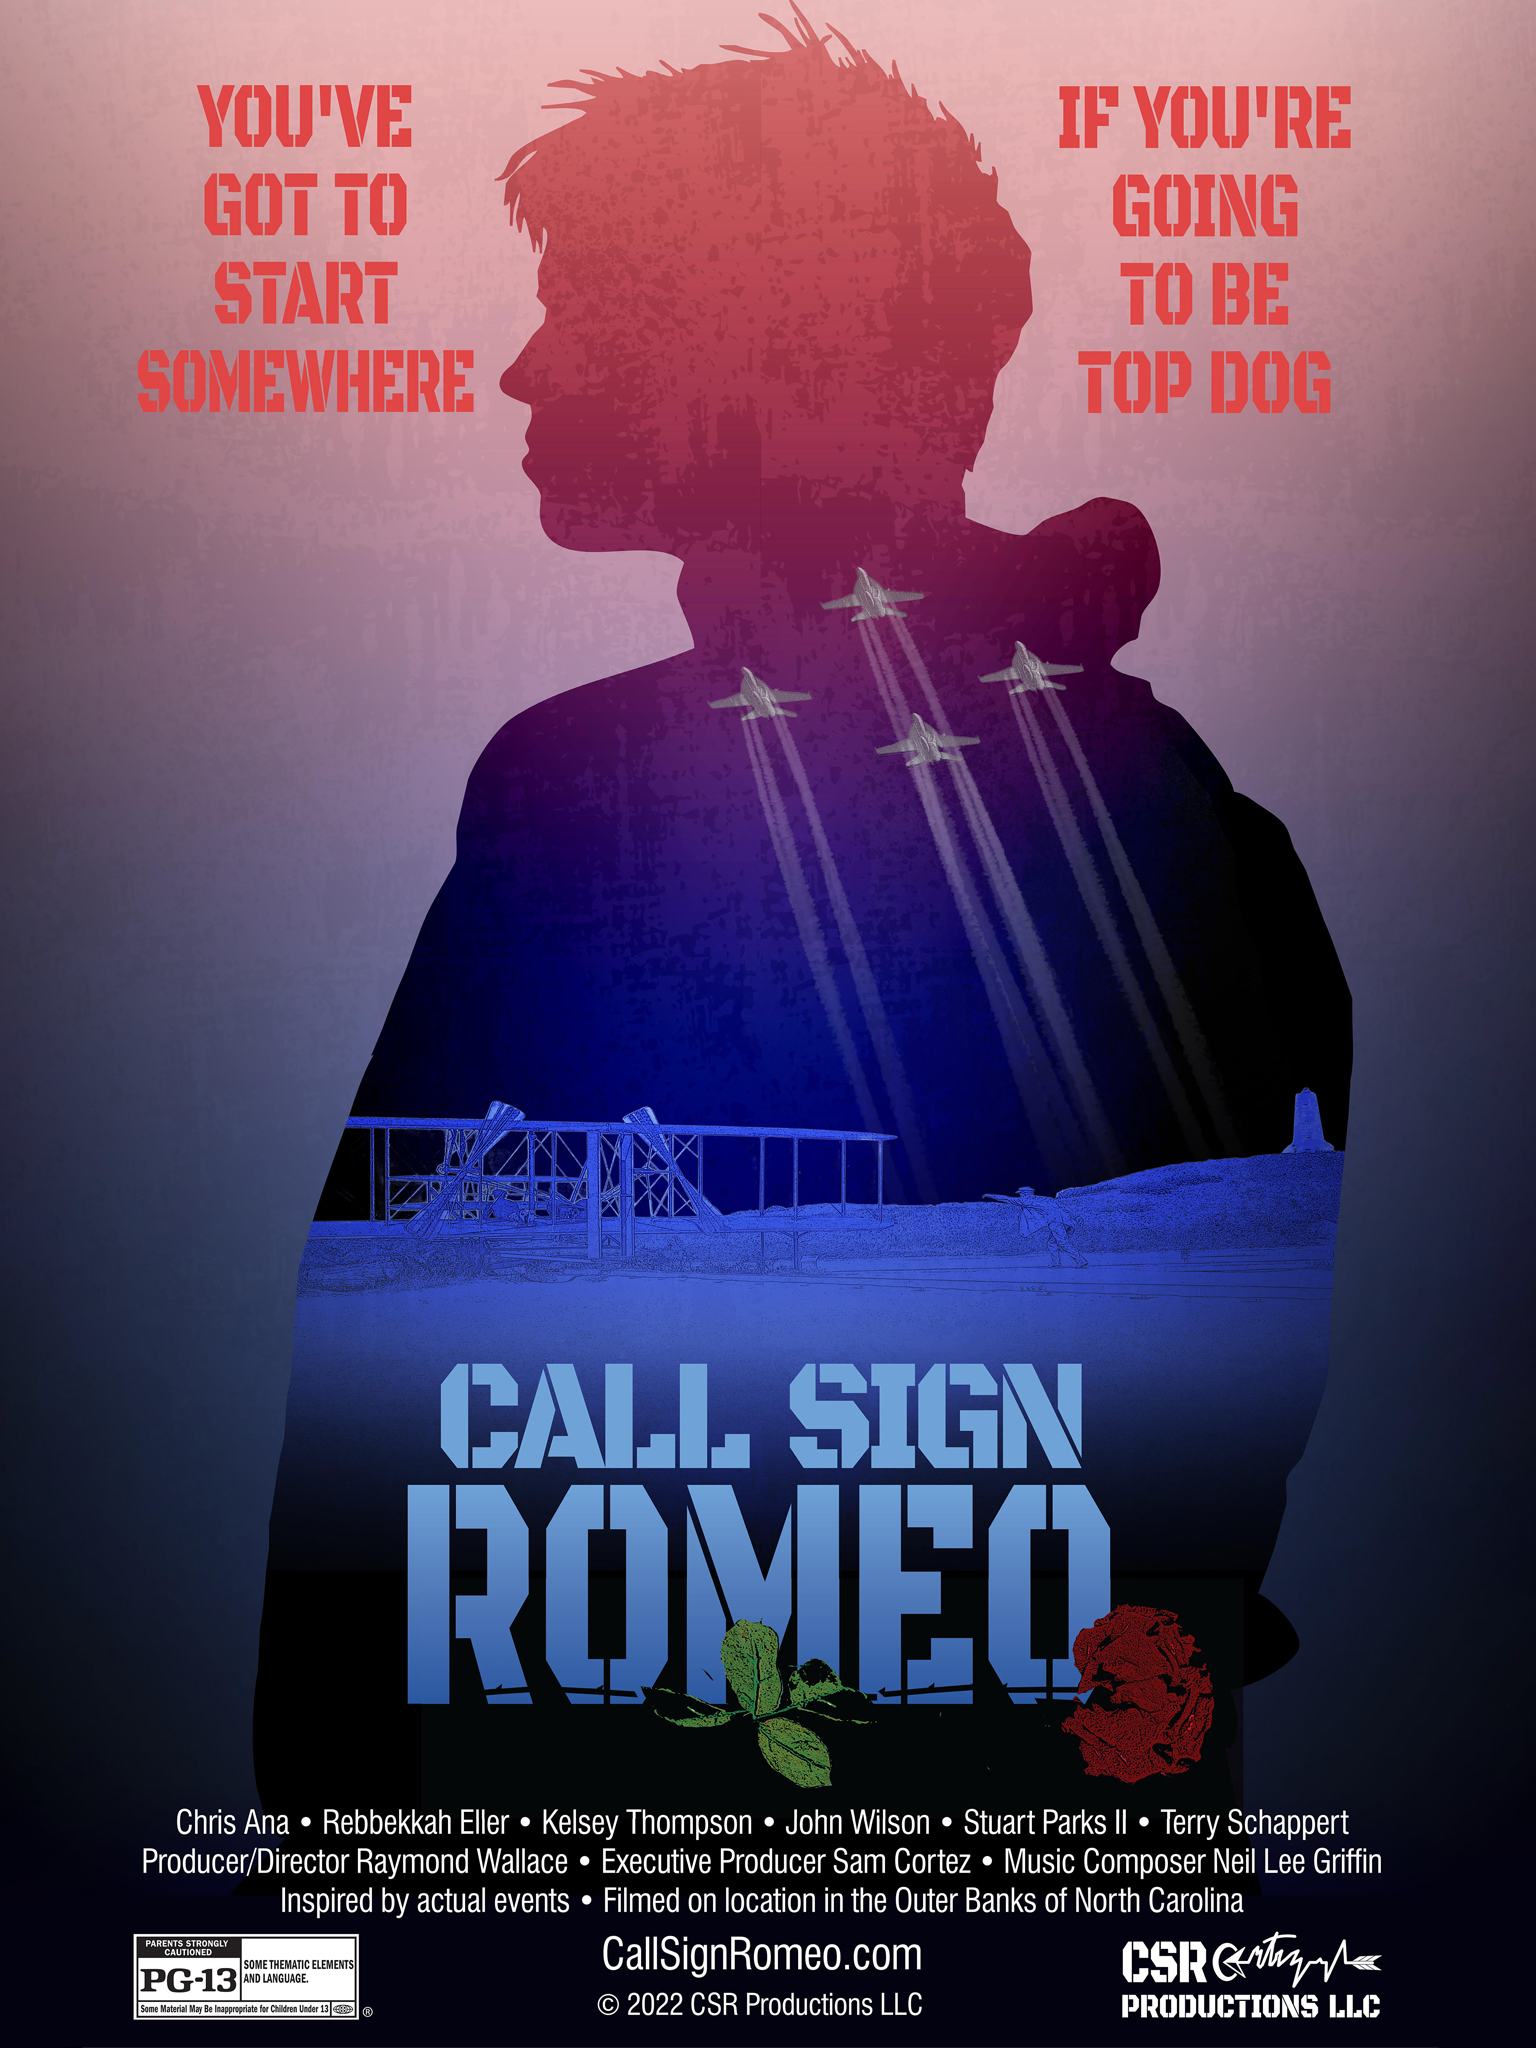 Outer Banks feature film “Call Sign Romeo” announces 4th of July video-on-demand Release Island Free Press